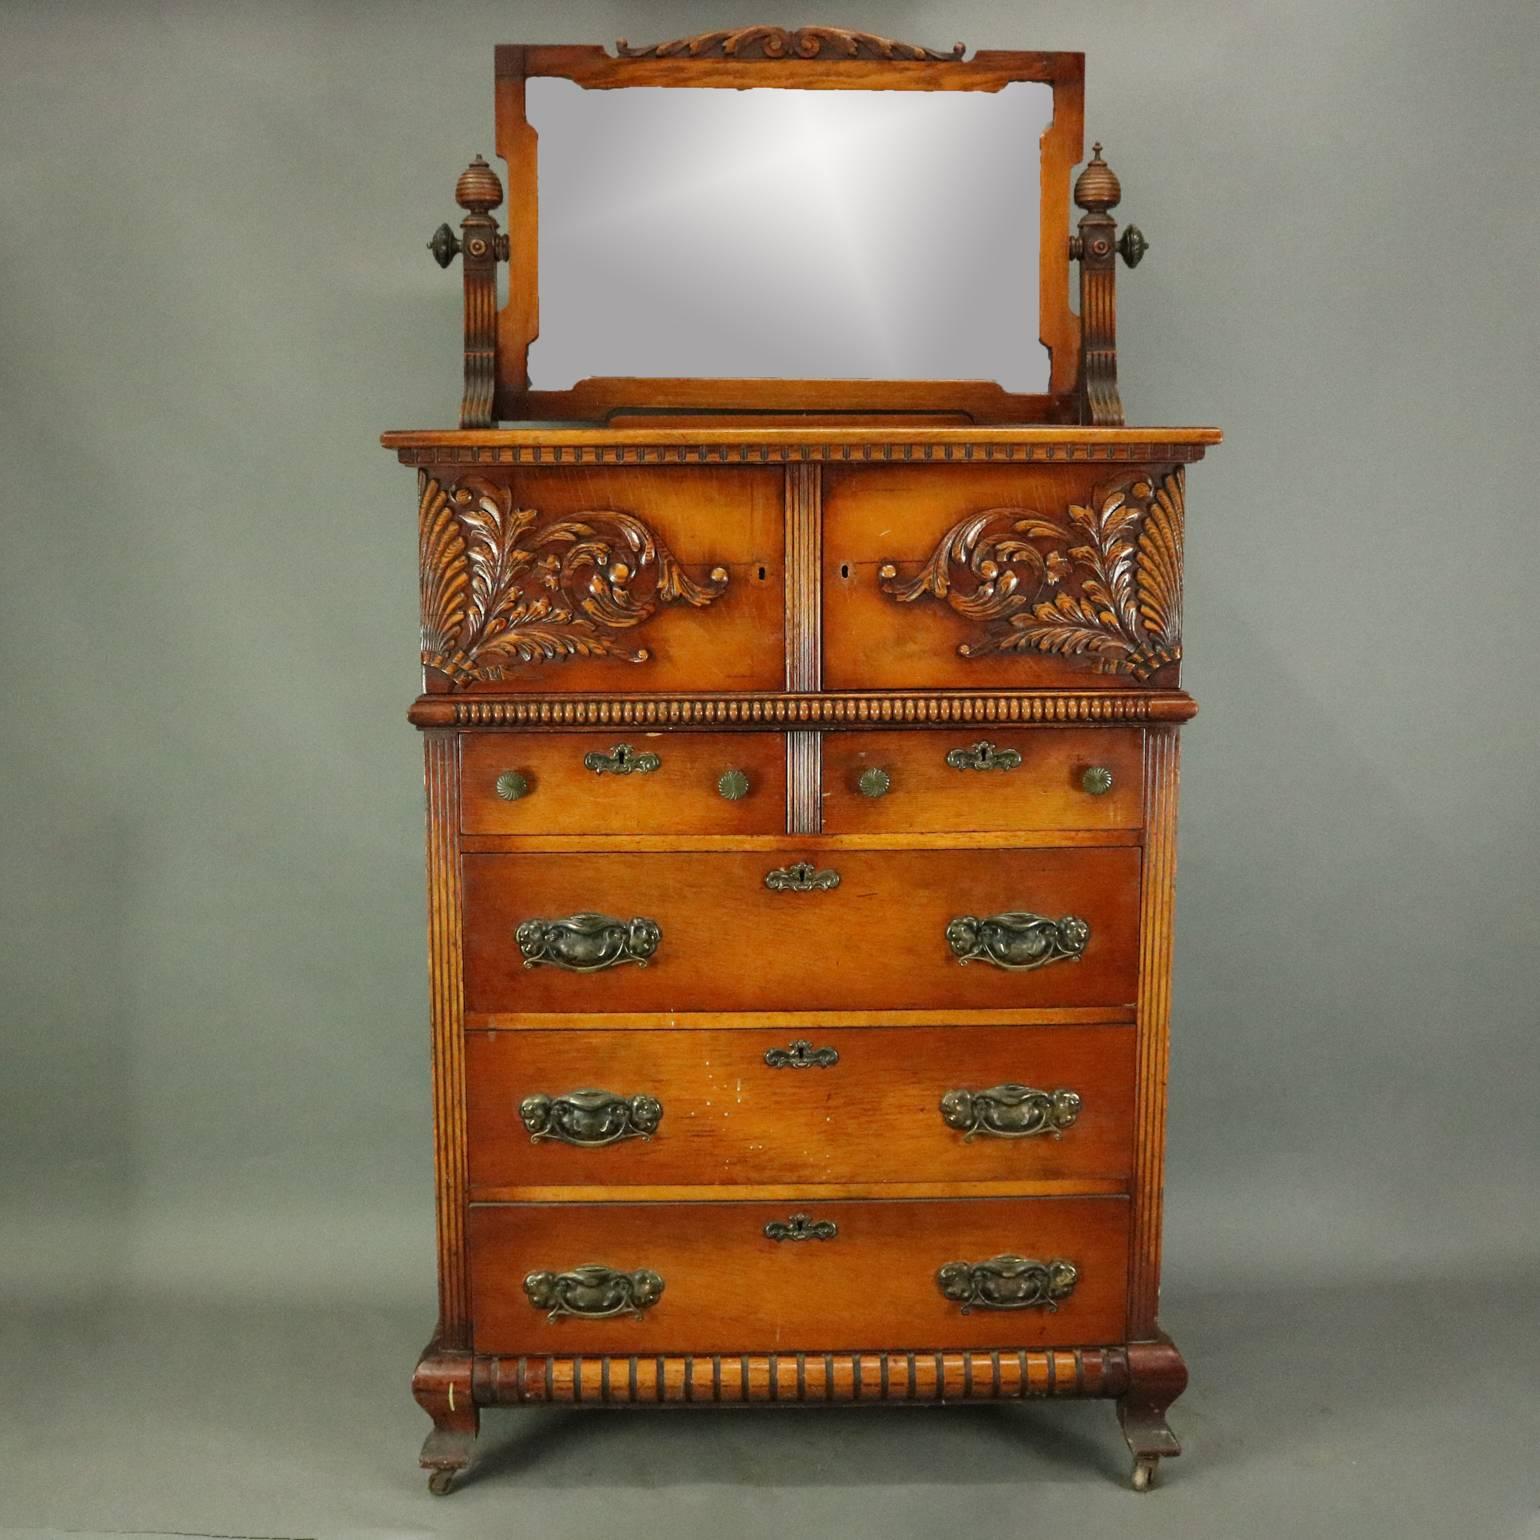 Oversized antique oak bonnet chest features two bonnet compartments over two small and three long drawers, carved foliate and shell decoration, dental and beaded molding, reeded mirror supports with beehive finials, bronze pulls, circa